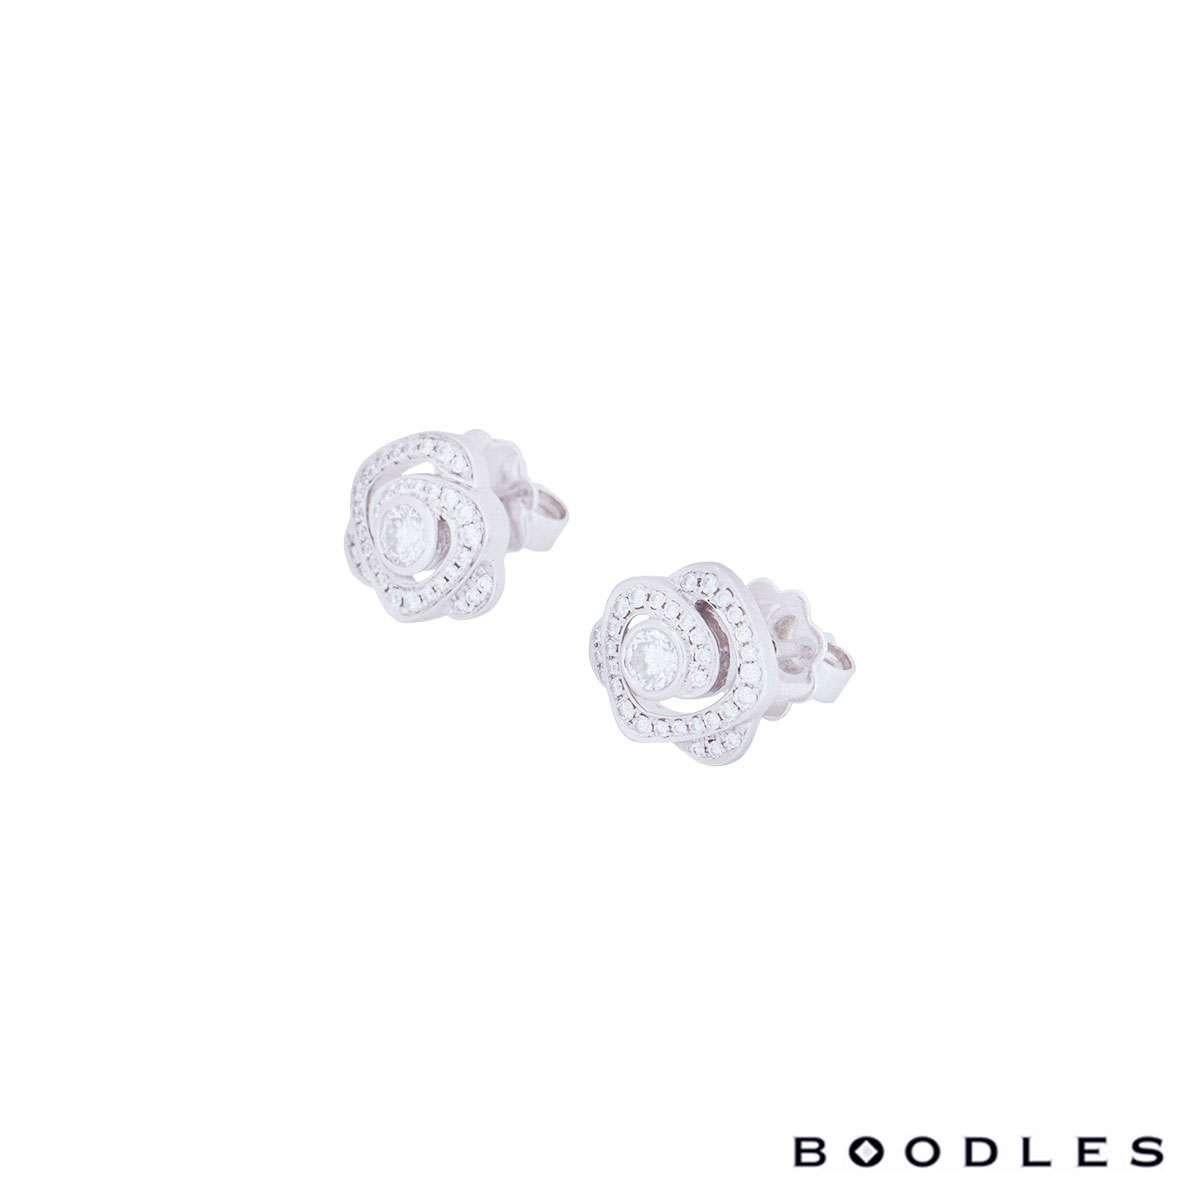 An elegant pair of platinum earrings from the Maymay Rose collection by Boodles. Each earring has a single round brilliant cut diamond in the centre, surrounded by pave set diamonds in the form of petals. There are 68 diamonds in total with an